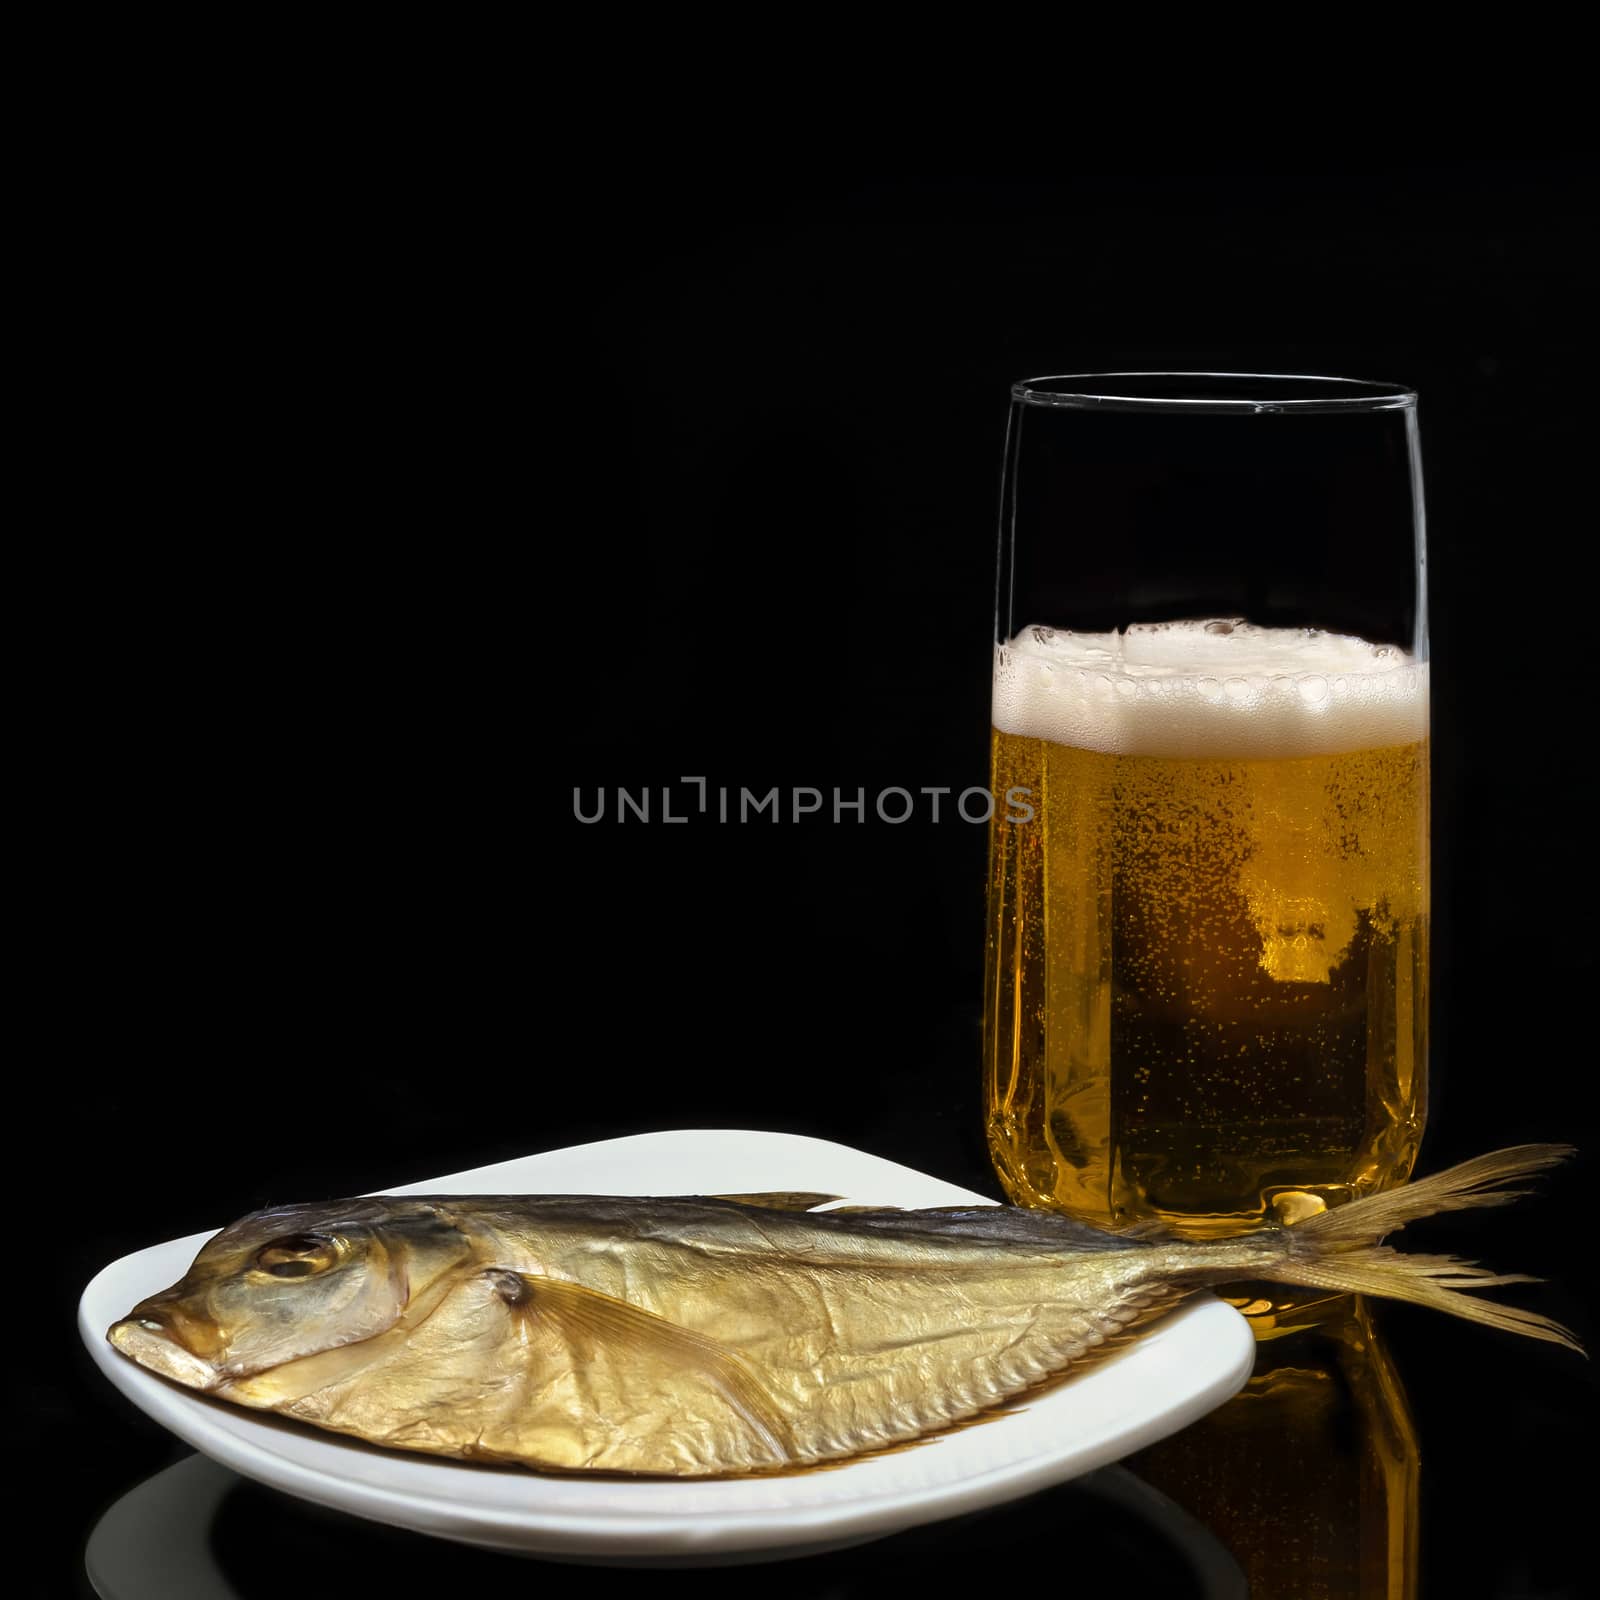 Beer in the glass and fish on a plate, on a black background